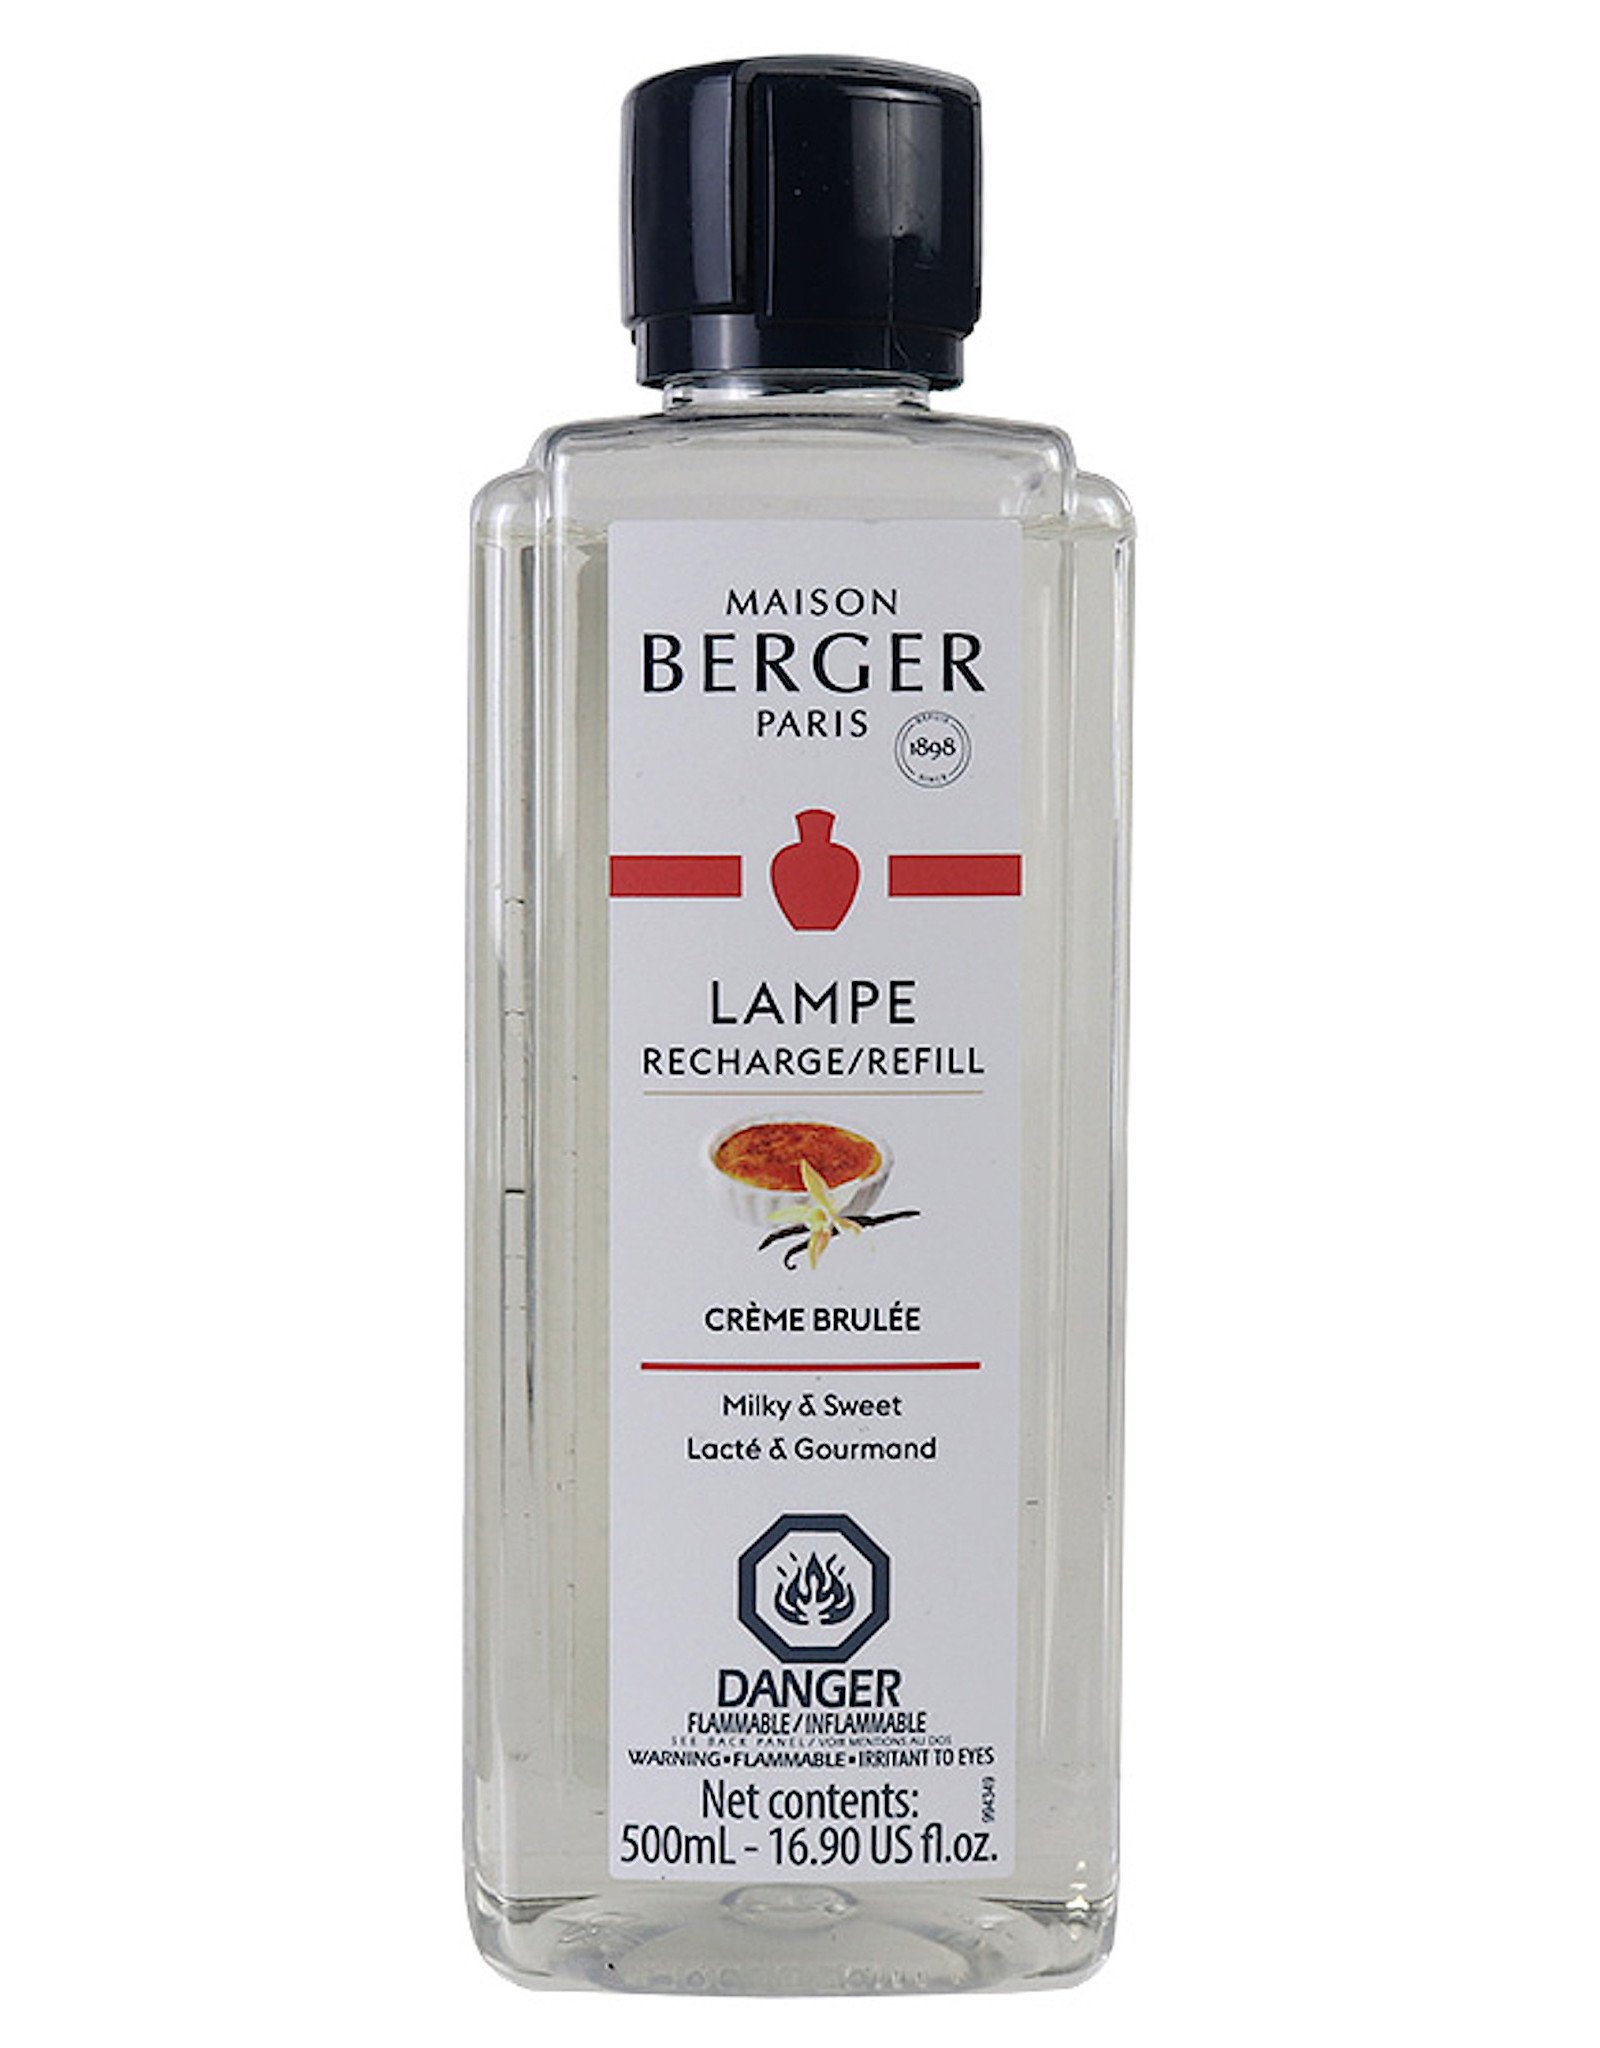 Buy Maison Berger Products Online - Luxurious Interiors